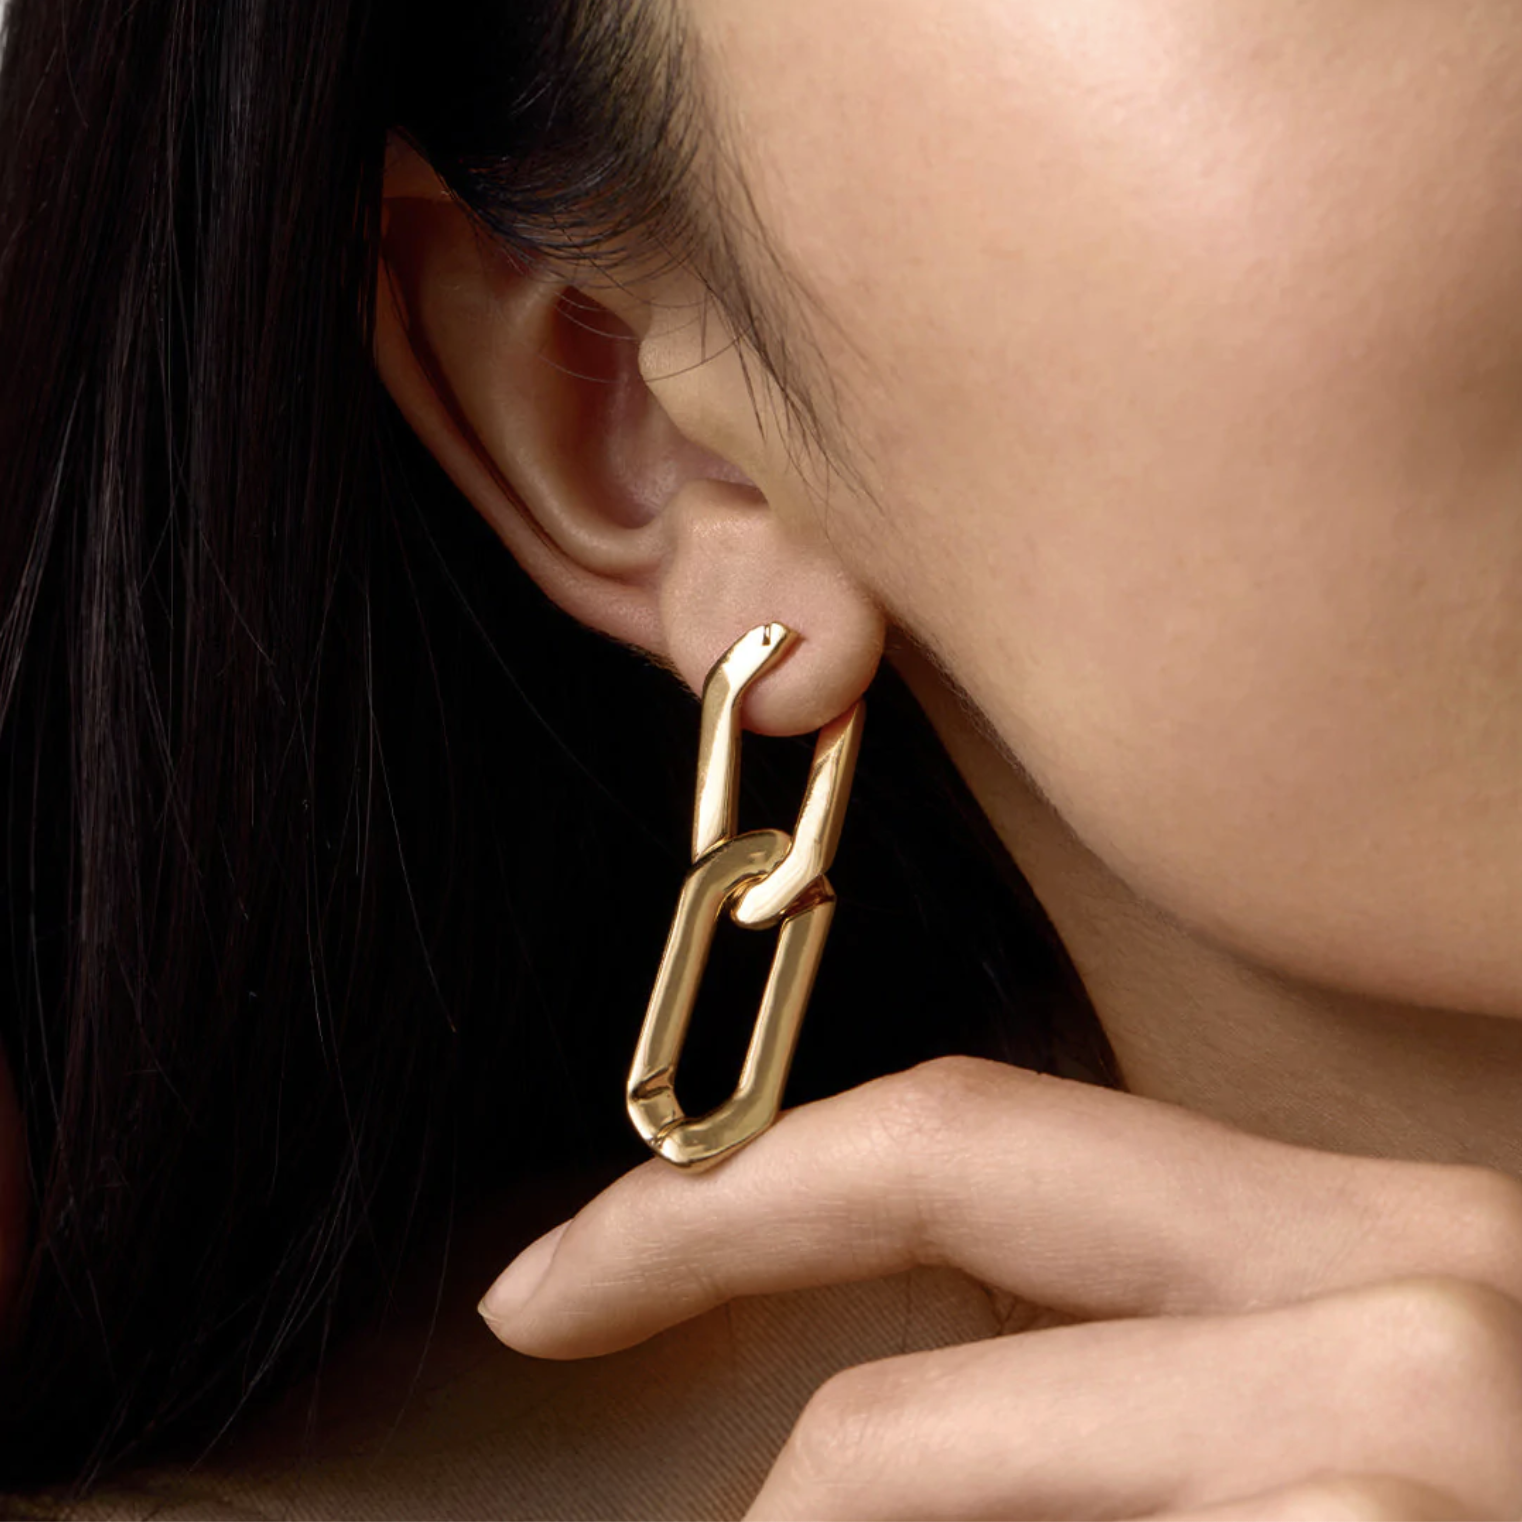 A person wearing a link earring in their lobe